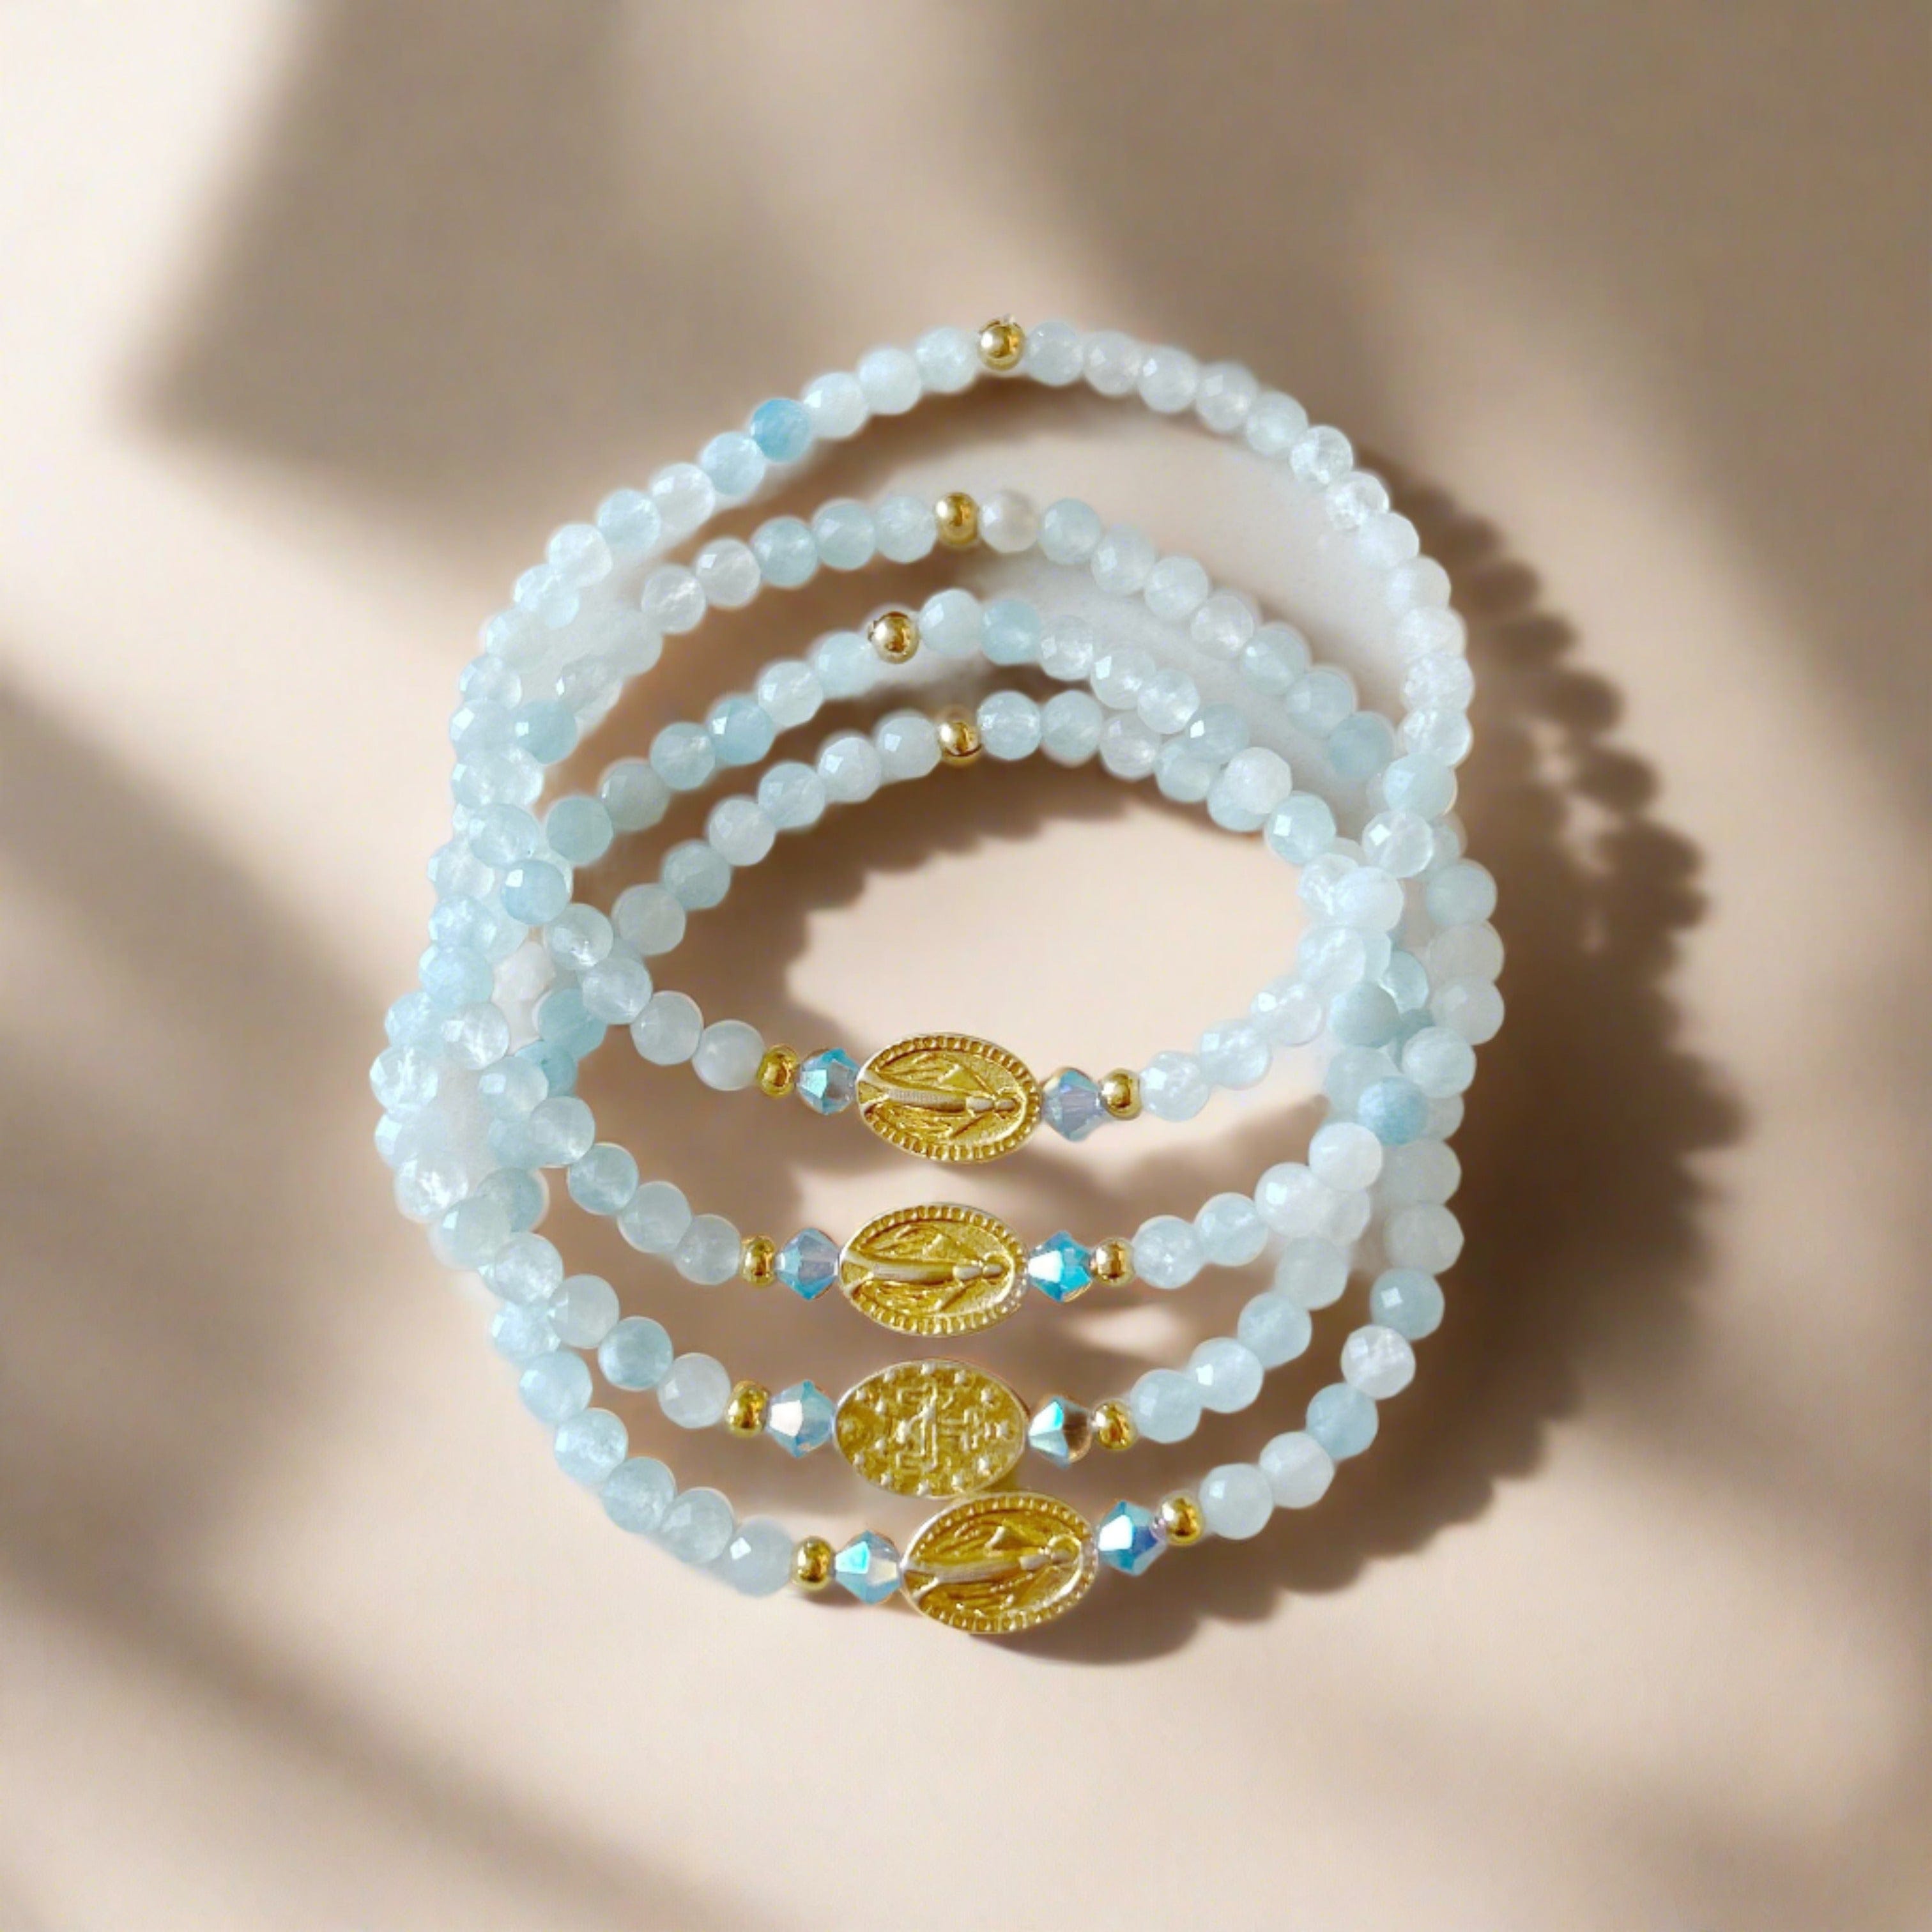 picture of a stack of beaded bracelets with virgin mary charm in center against a tan soft lit background